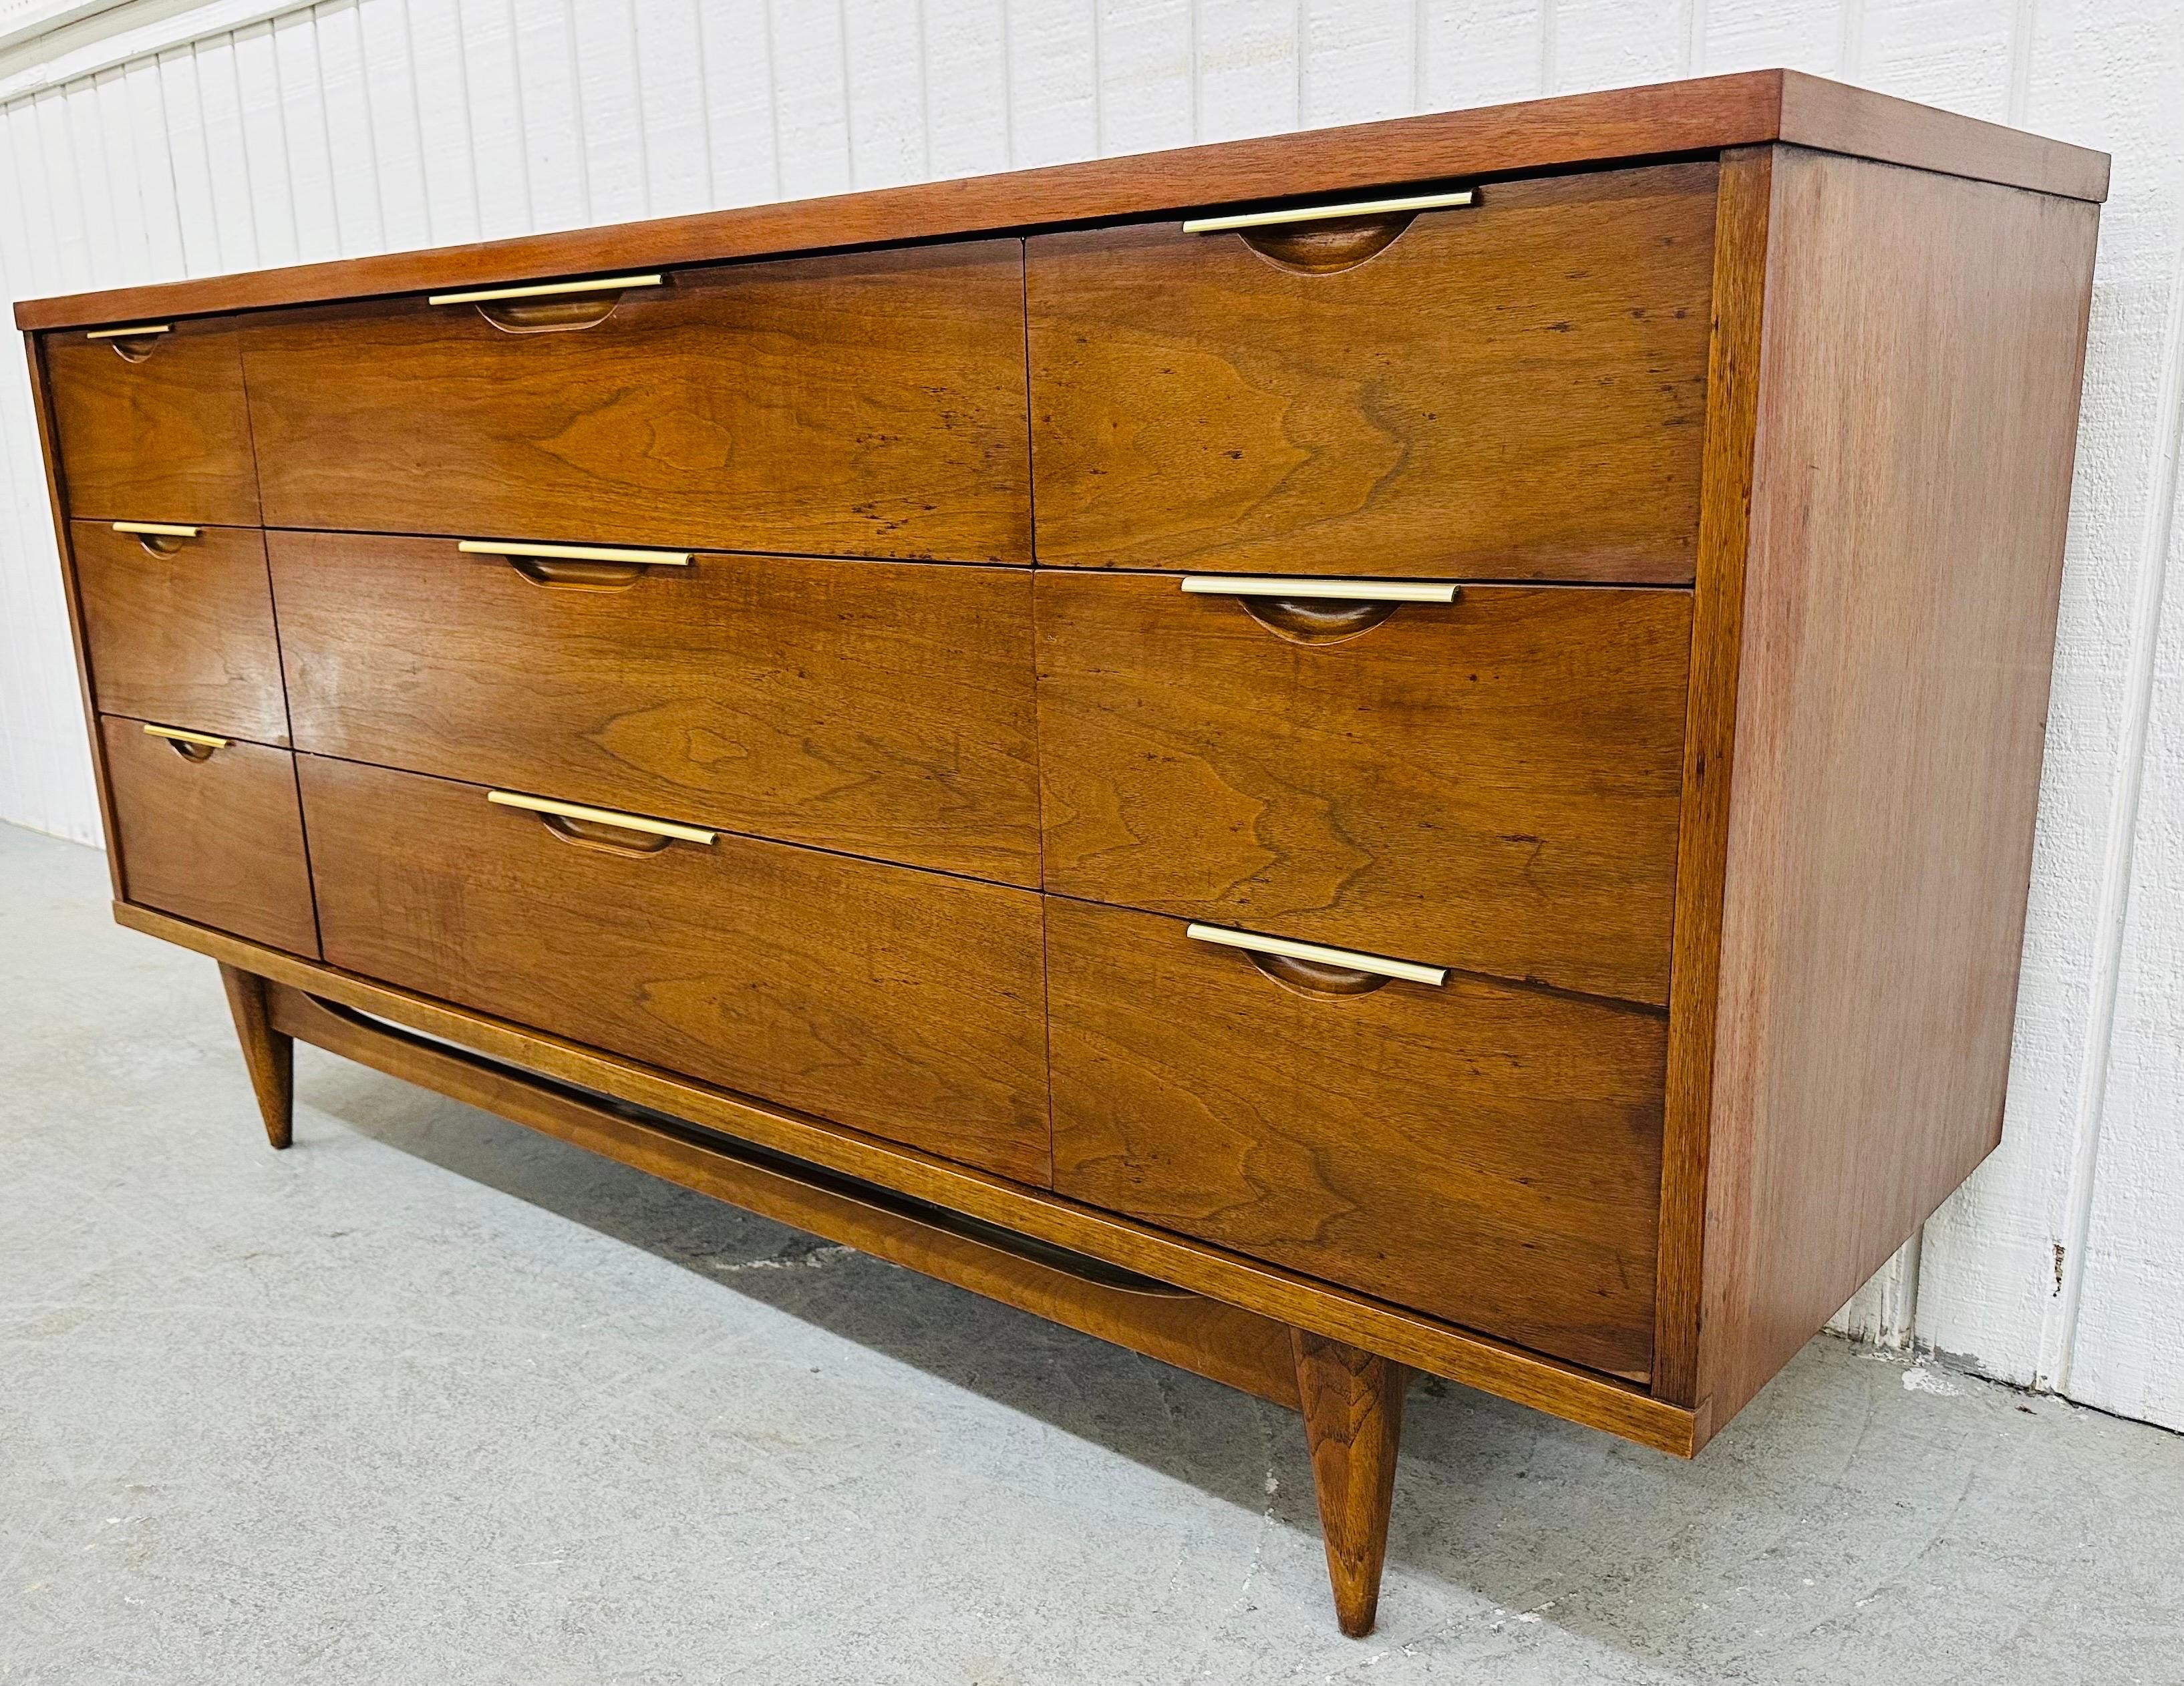 This listing is for a Mid-Century Modern Kent Coffey Tableau Walnut Dresser. Featuring a straight line design, nine drawers for storage, original chrome pulls, and a beautiful walnut finish. This is an exceptional combination of quality and design